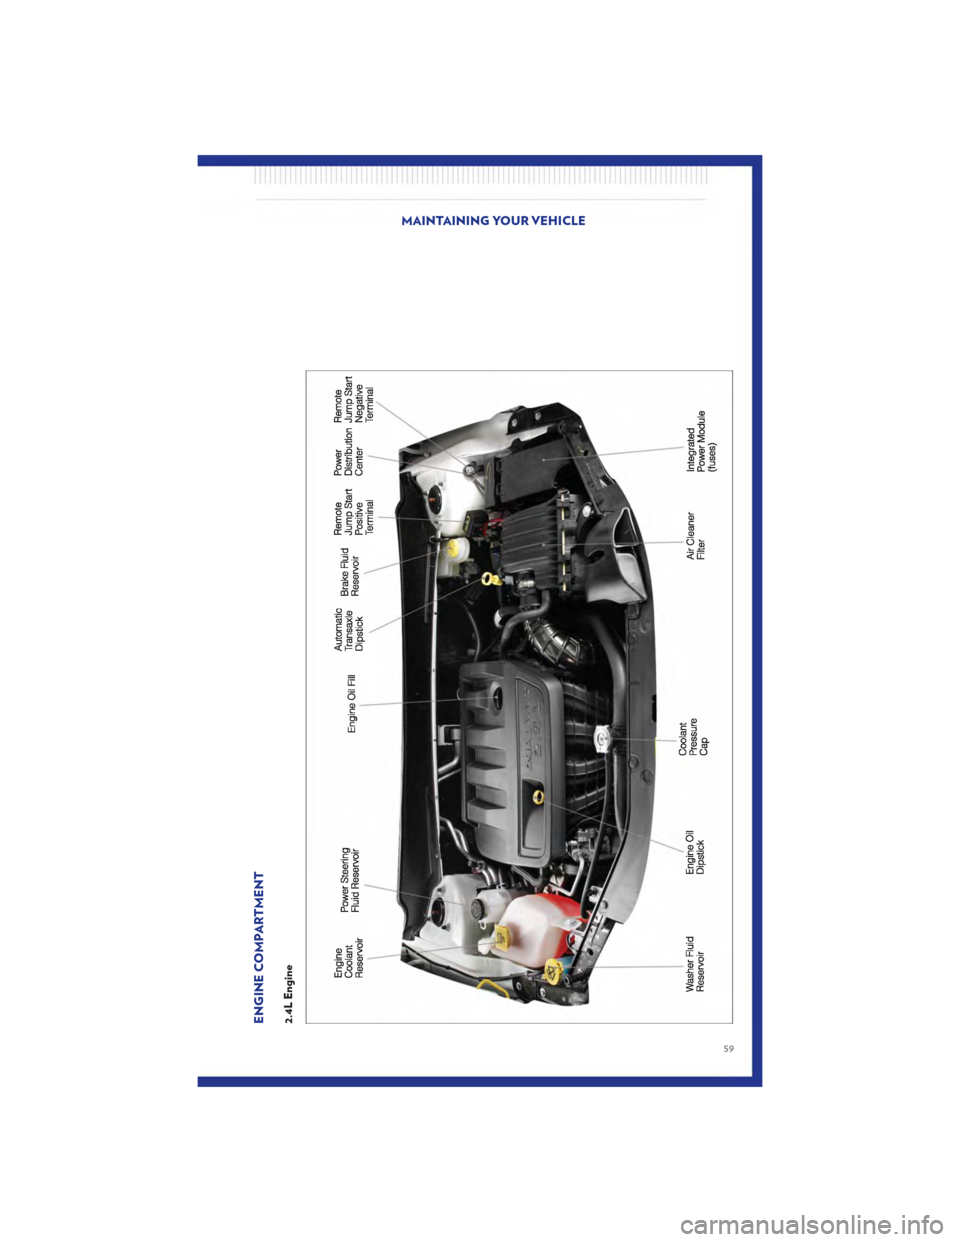 CHRYSLER 200 2011 1.G Repair Manual ENGINE COMPARTMENT2.4L Engine
MAINTAINING YOUR VEHICLE
59 